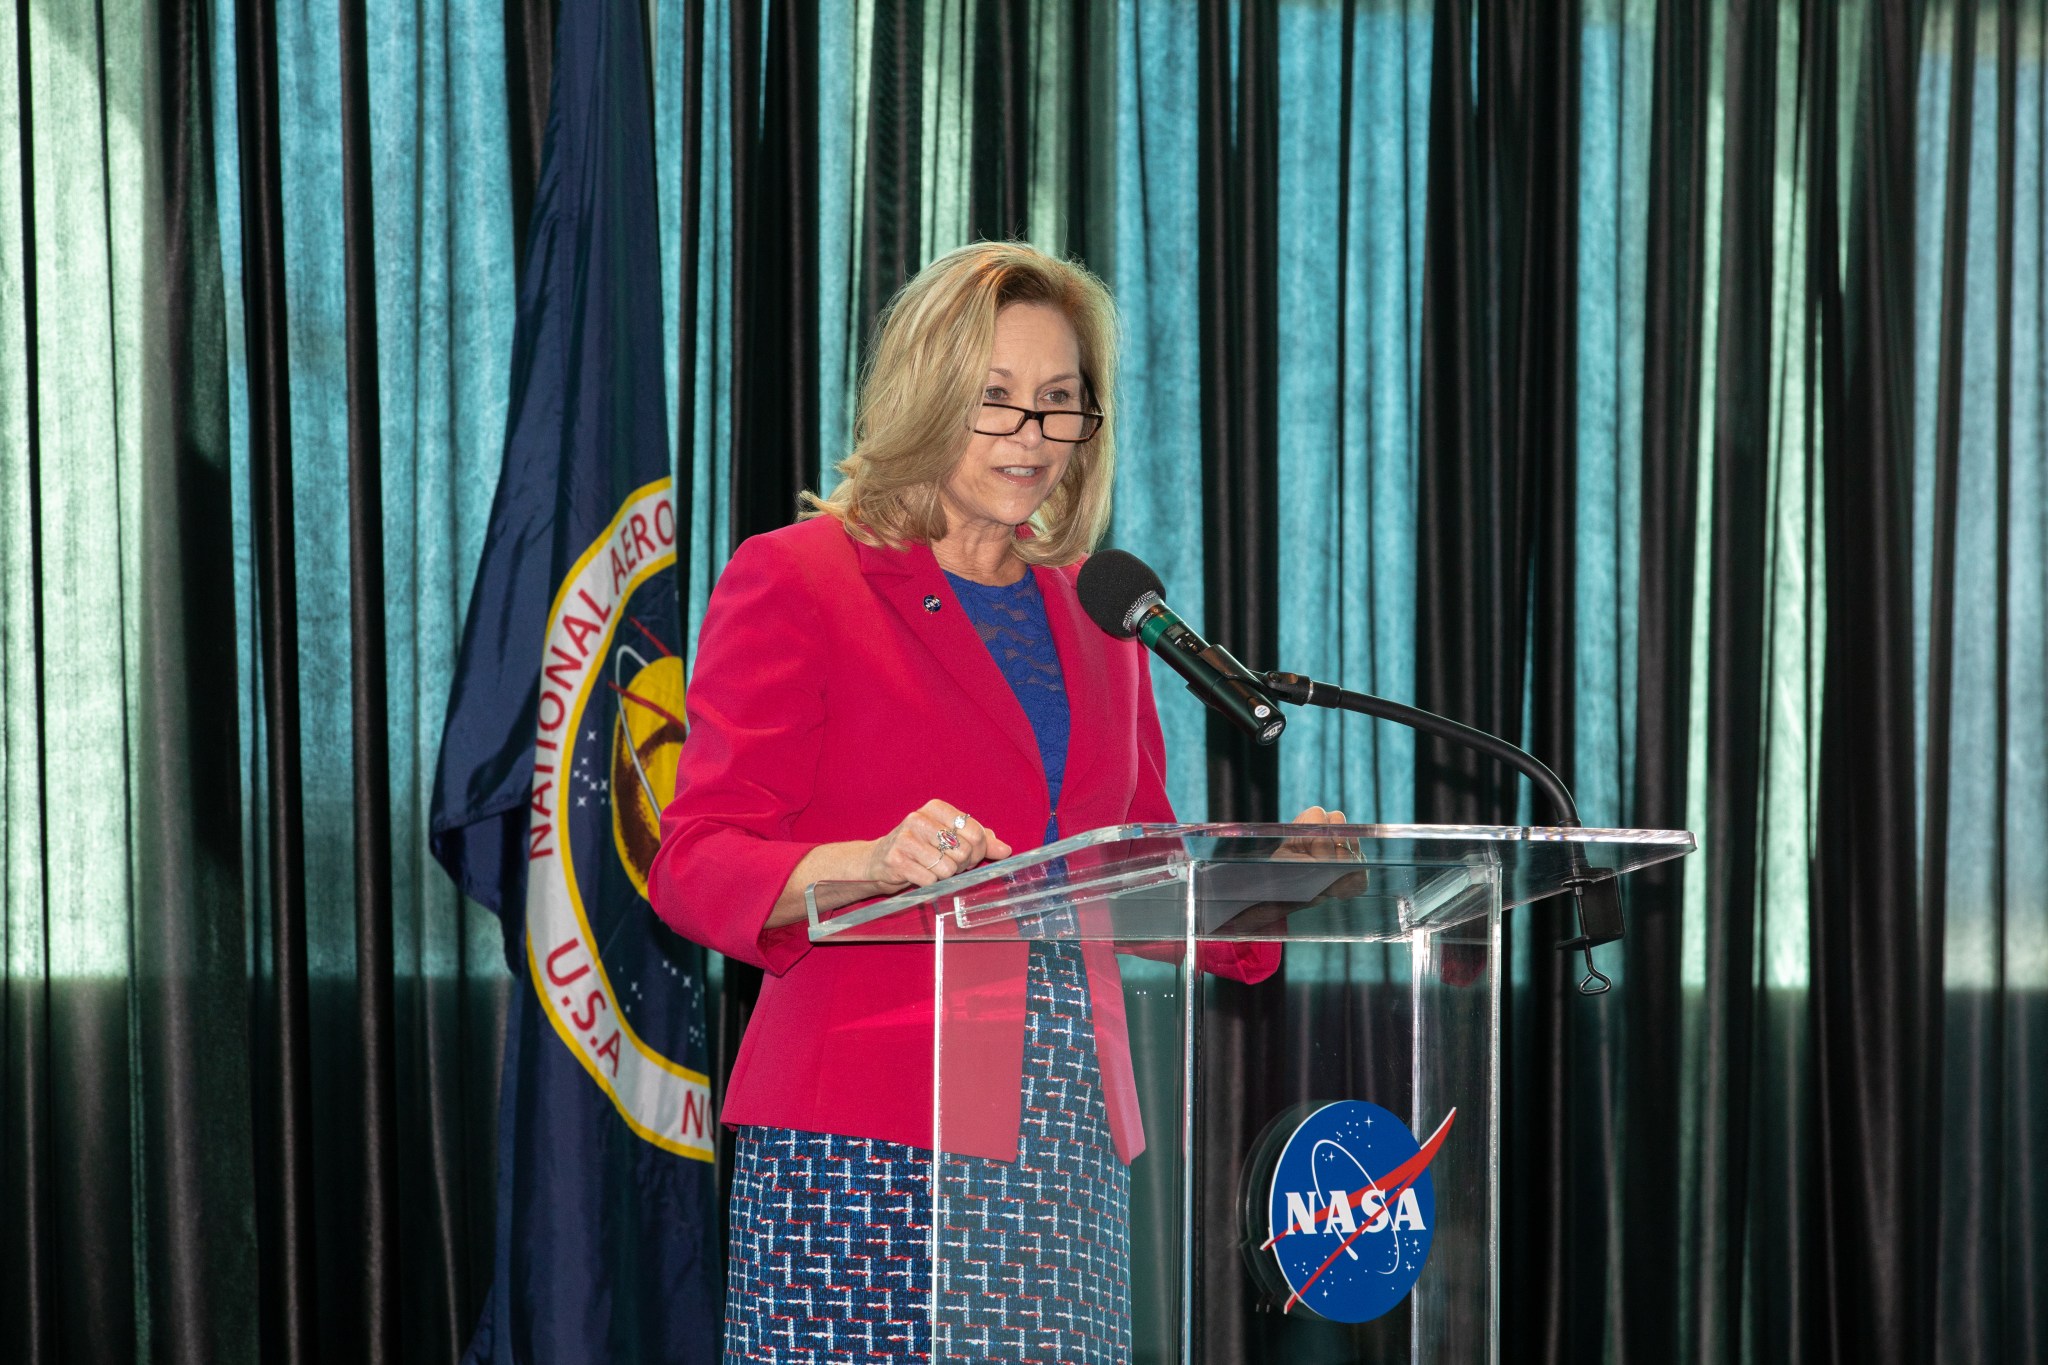 Kennedy Space Center Deputy Directory Janet Petro welcomes attendees to the NASA Business Opportunities Expo 2019.